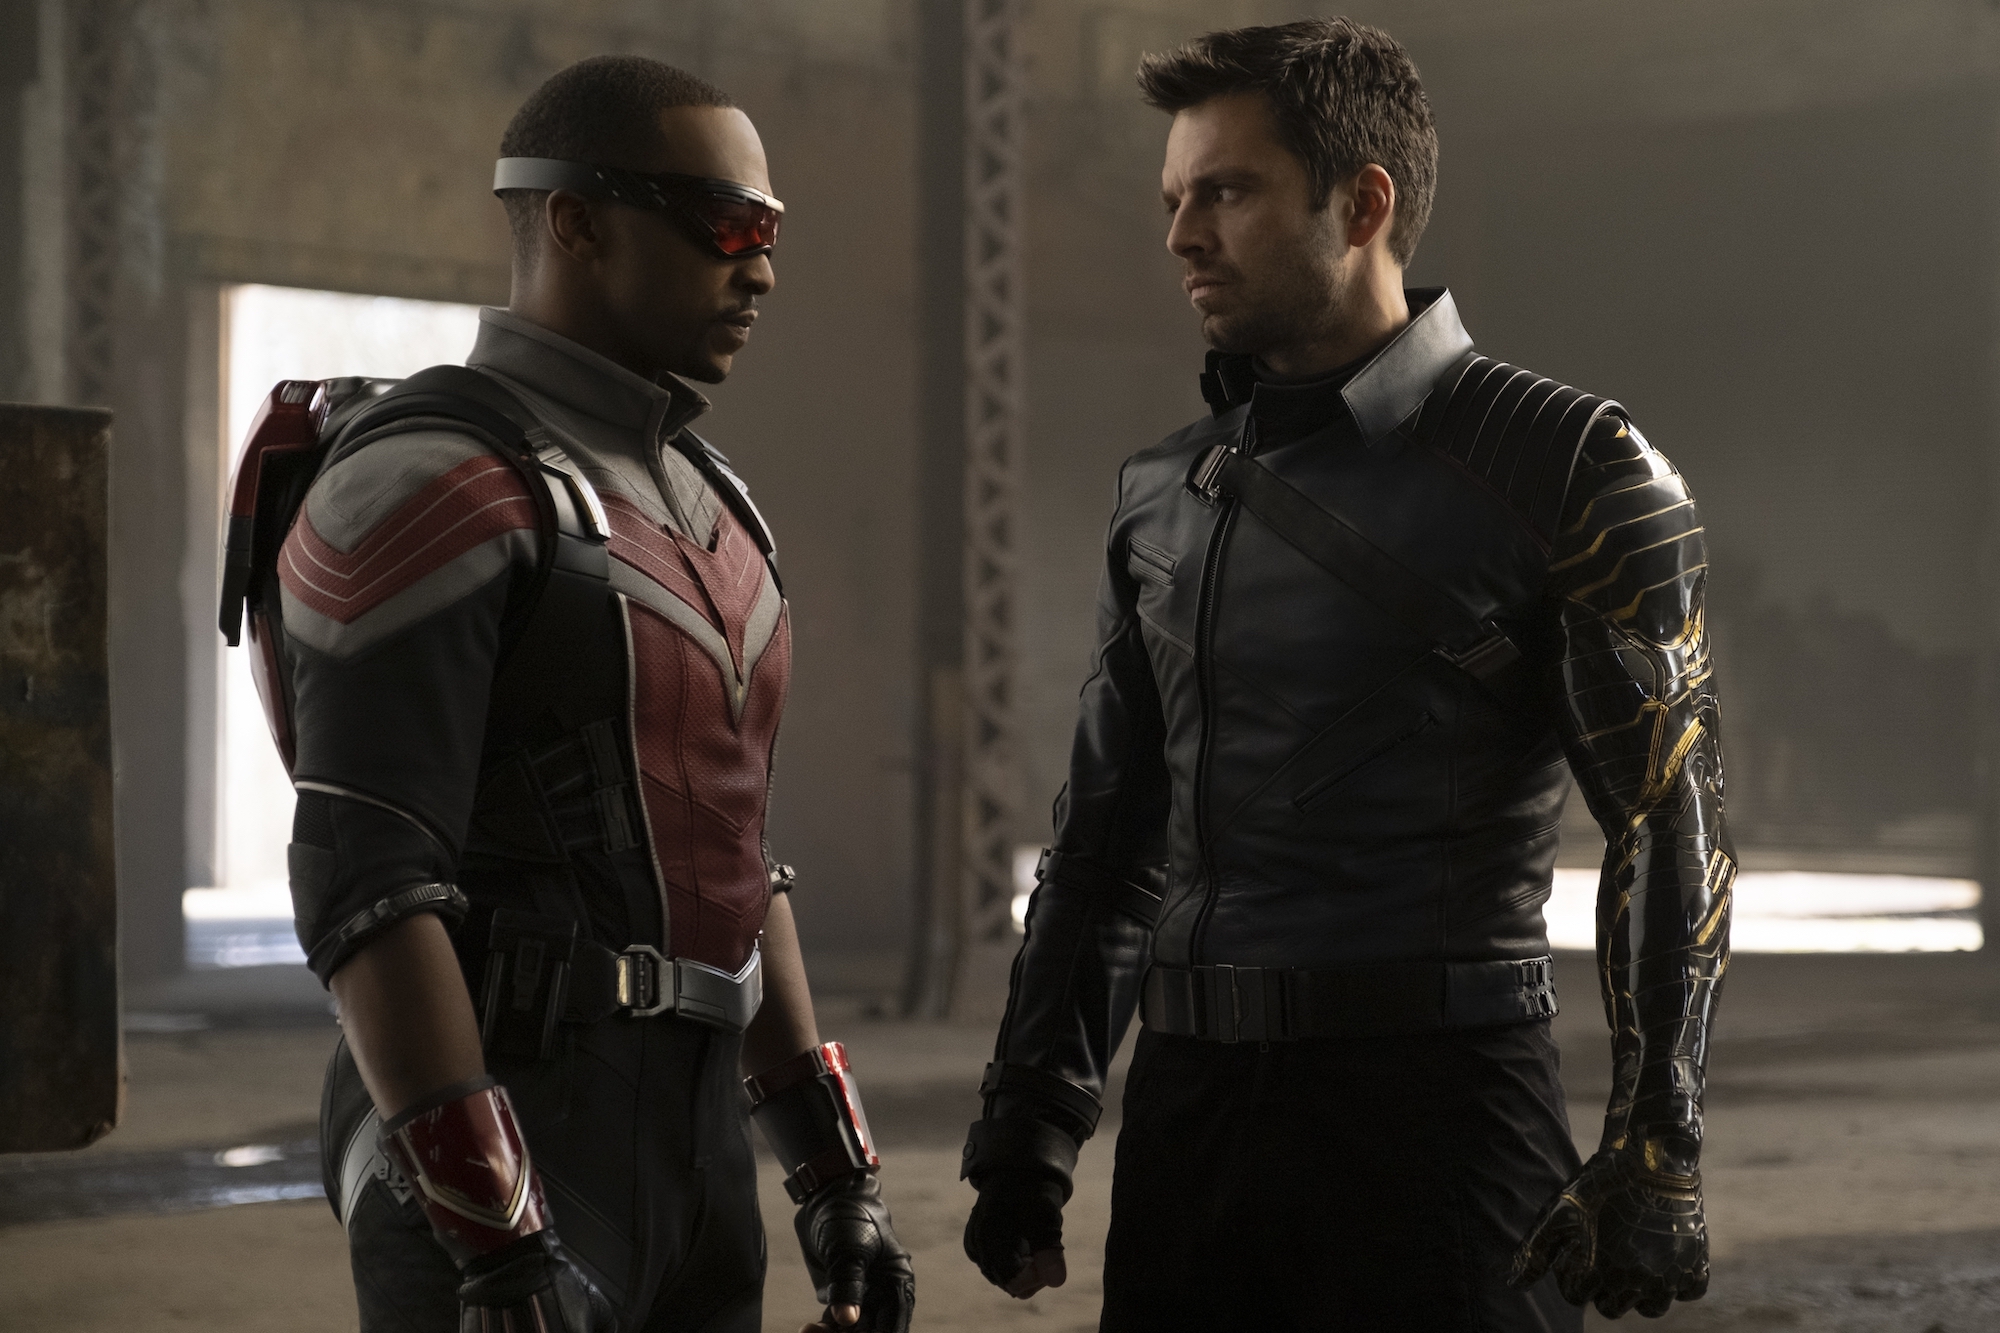 Anthony Mackie as Sam Wilson and Sebastian Stan as Bucky Barnes in 'The Falcon and the Winter Soldier'